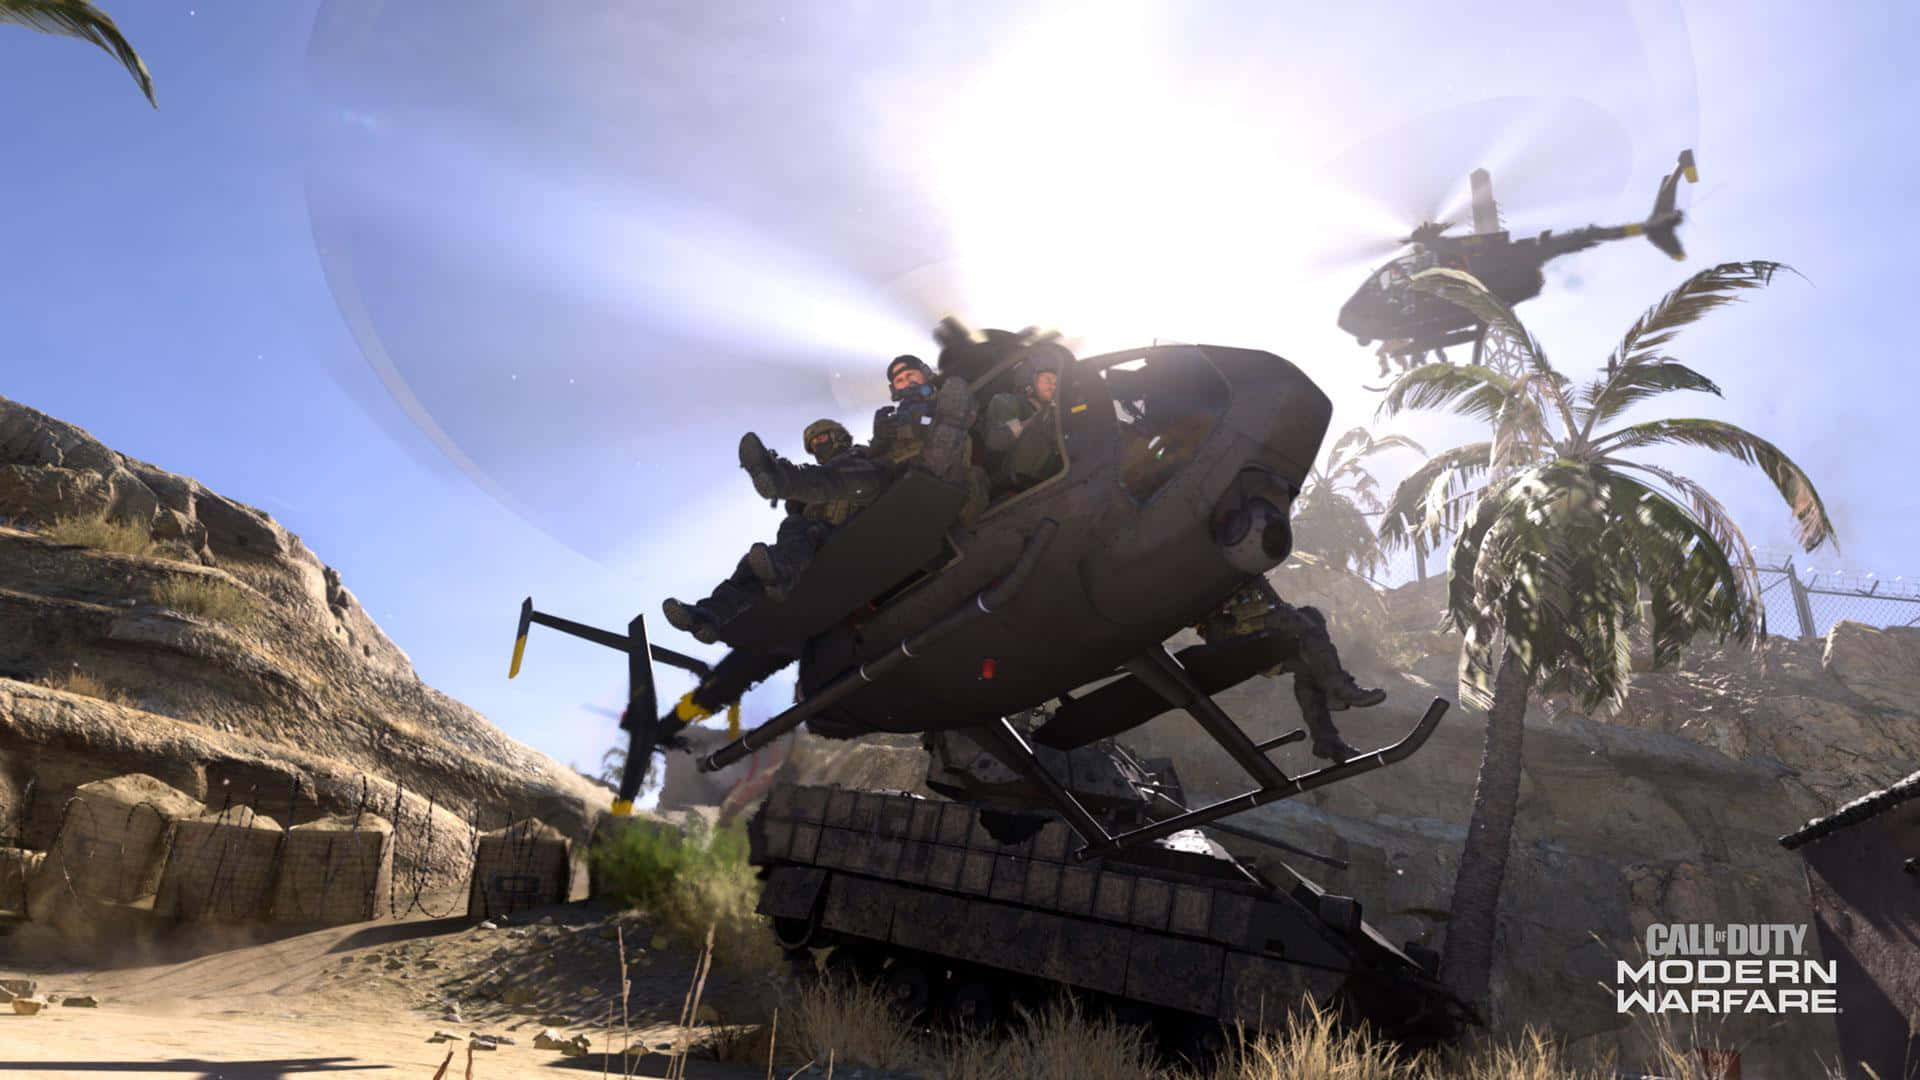 Intense moment in Call Of Duty featuring armed vehicles in action. Wallpaper